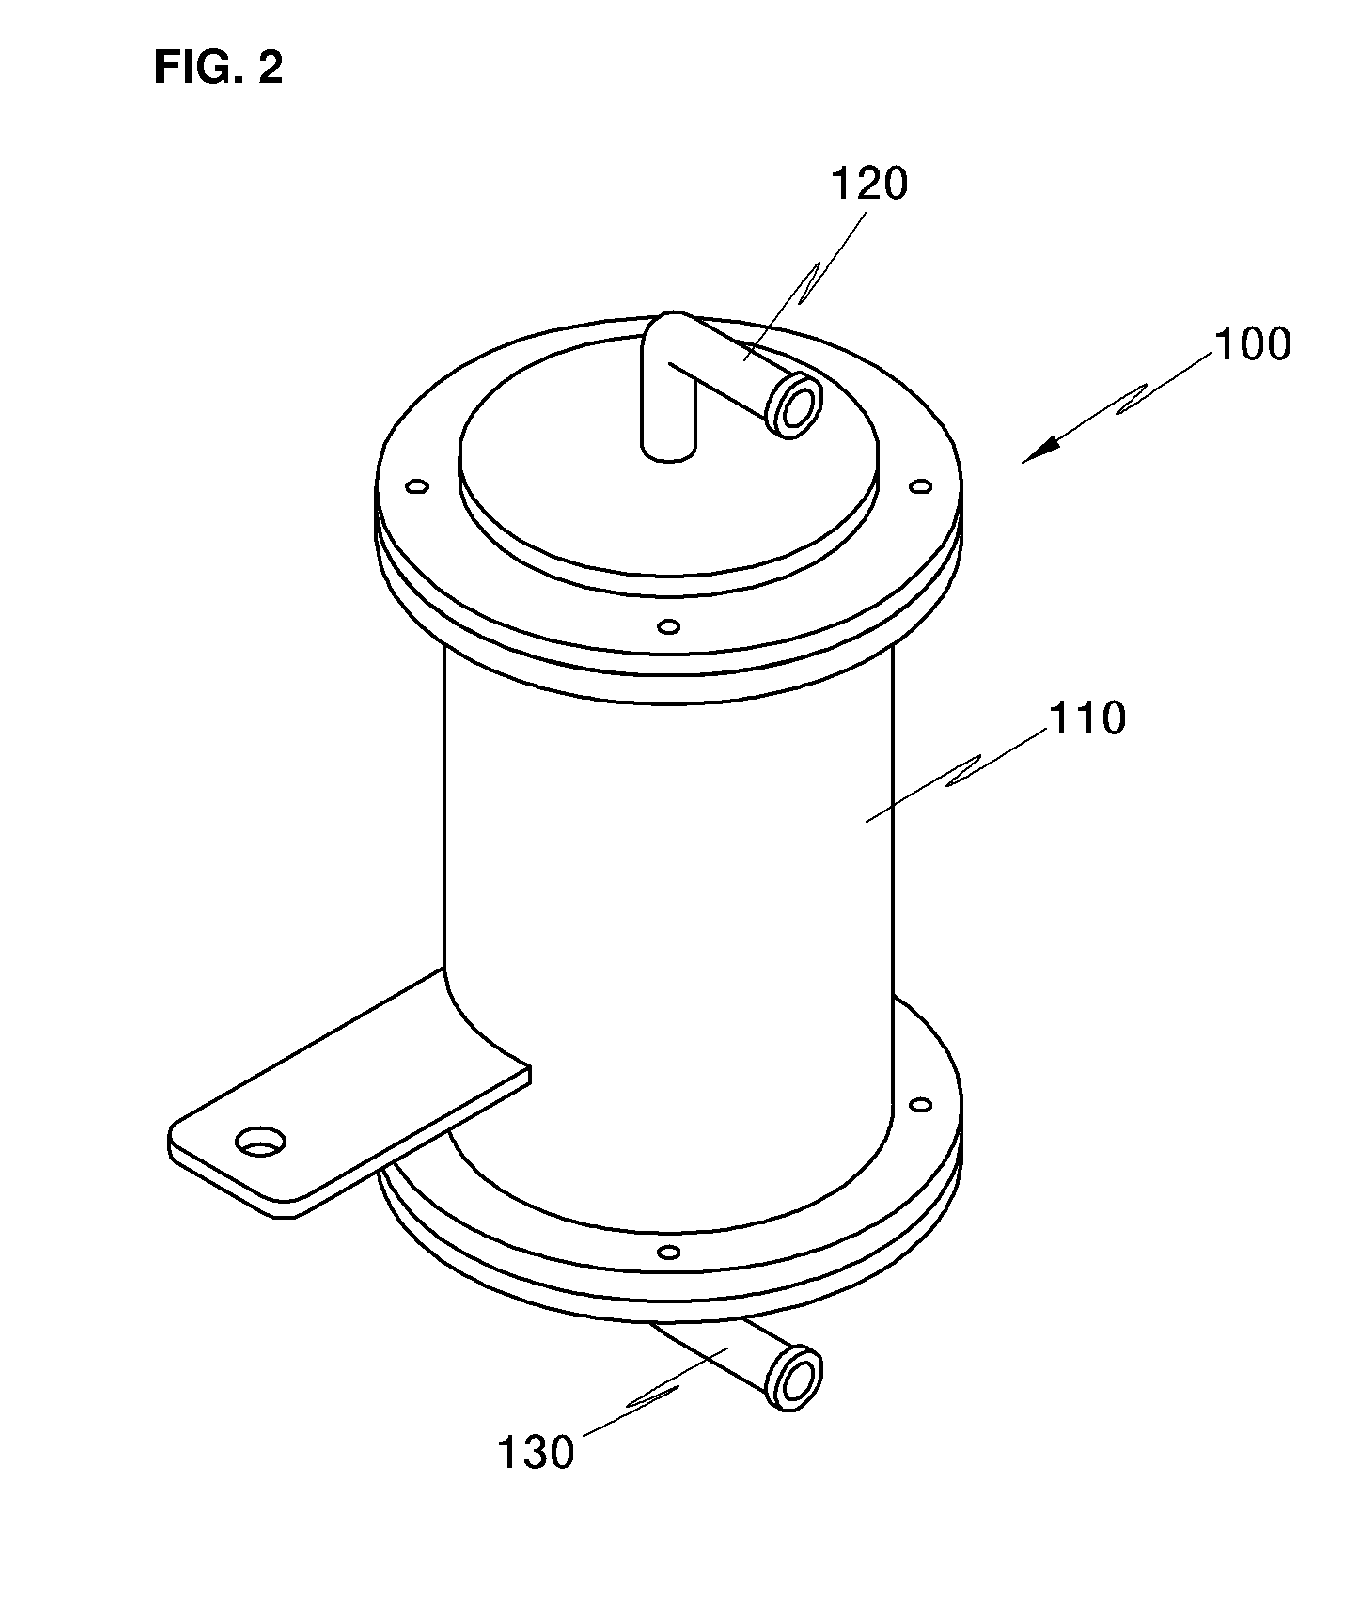 Coolant demineralizer for a fuel cell vehicle